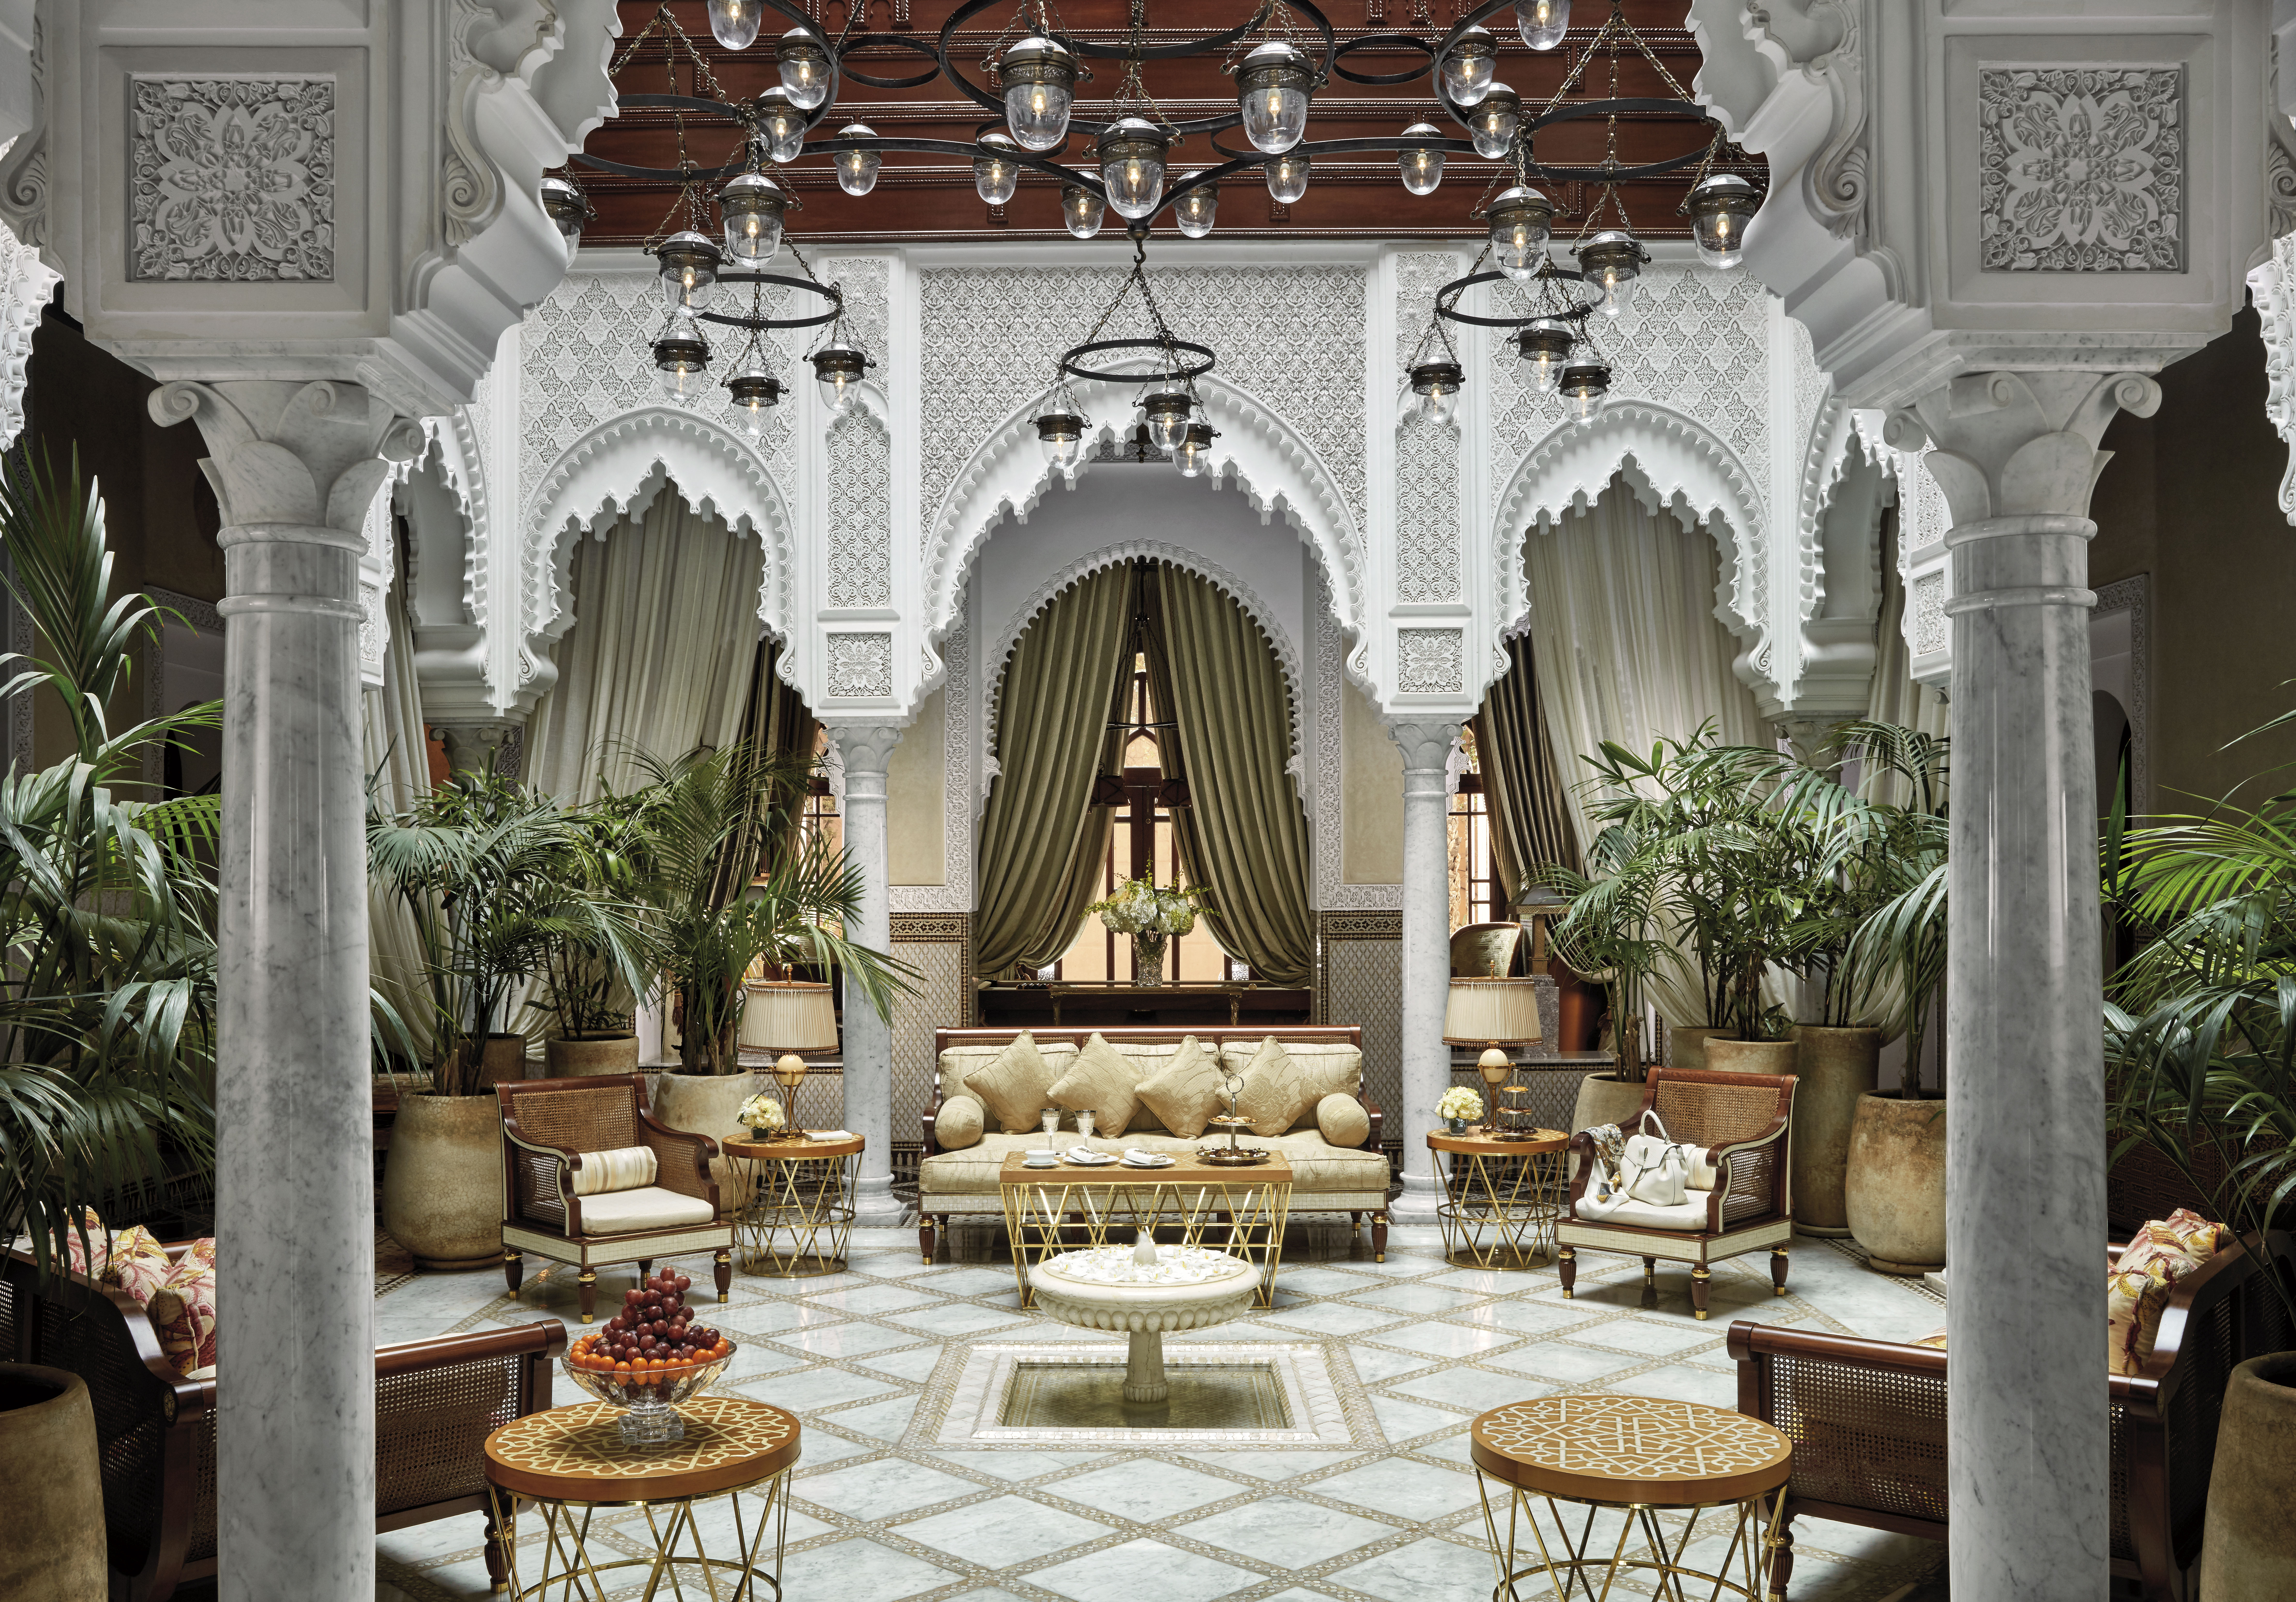 Royal Mansour Marrakech voted the best hotel in Africa by Condé Nast Traveler